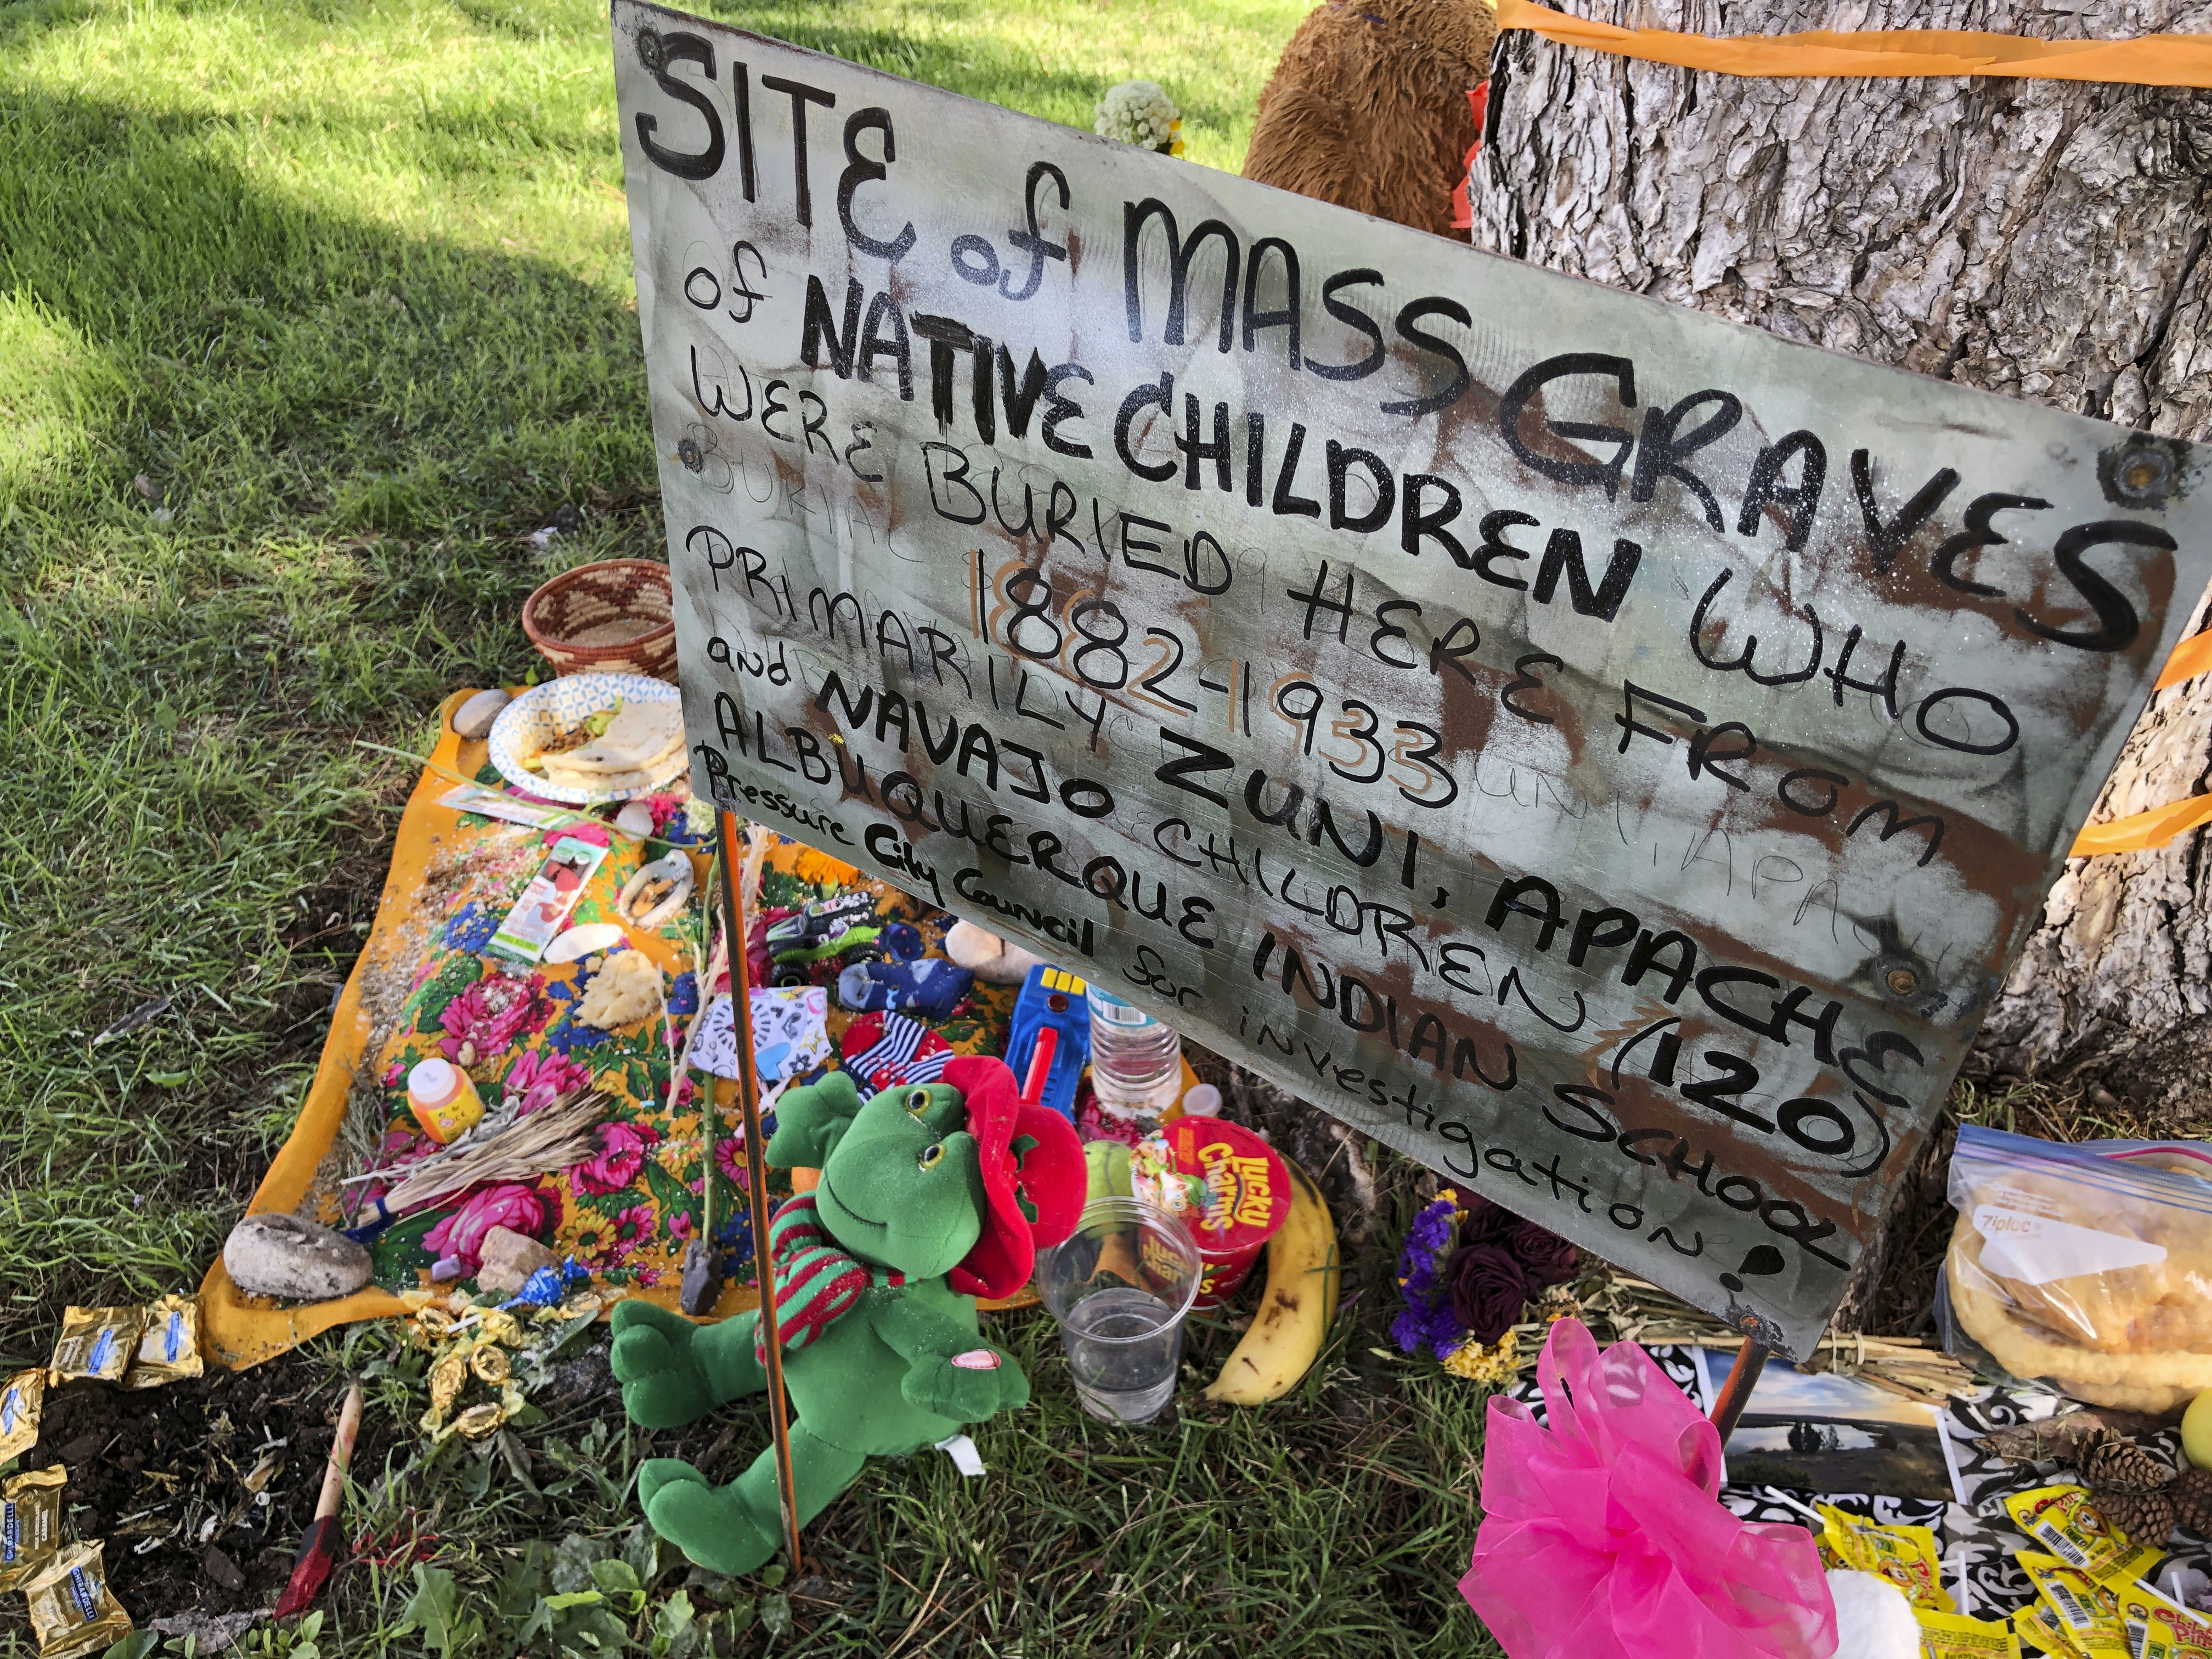 A makeshift memorial for the dozens of Indigenous children who died more than a century ago while attending a boarding school that was once located nearby is displayed under a tree July 1, 2021, in Albuquerque, New Mexico. (AP photo/Susan Montoya Bryan, File)